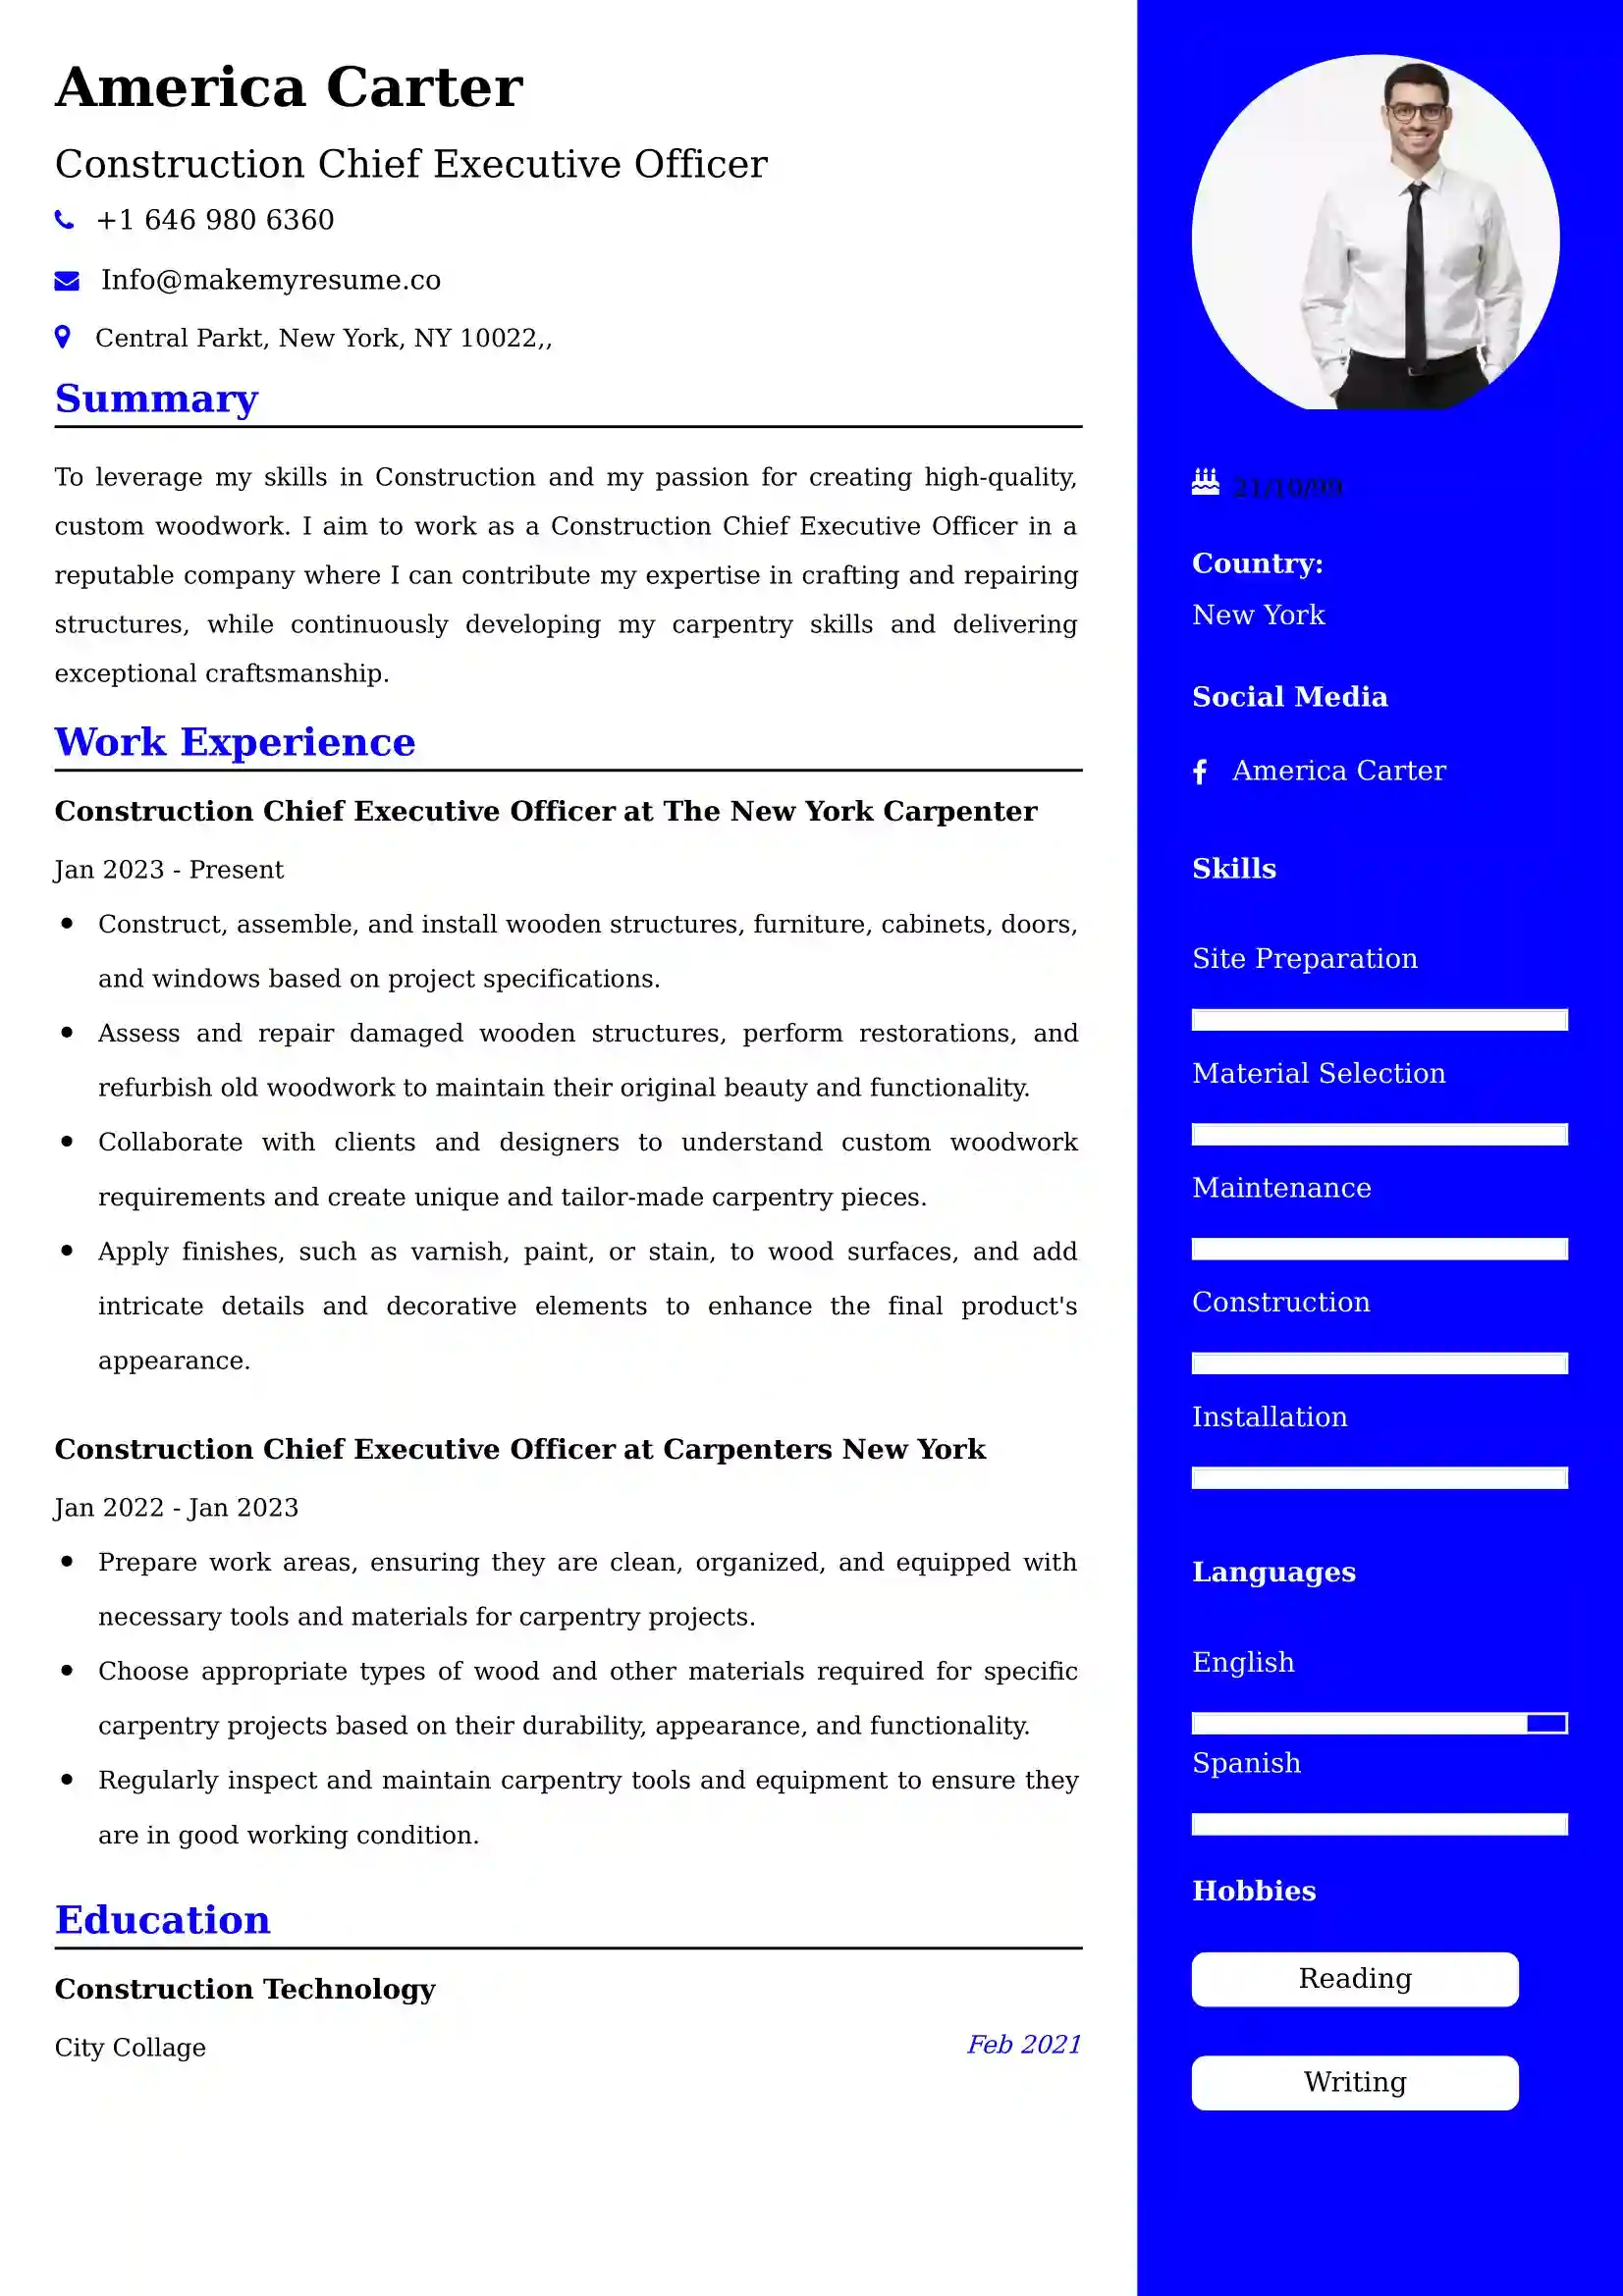 Construction Chief Executive Officer Resume Examples - Brazilian Format, Latest Template